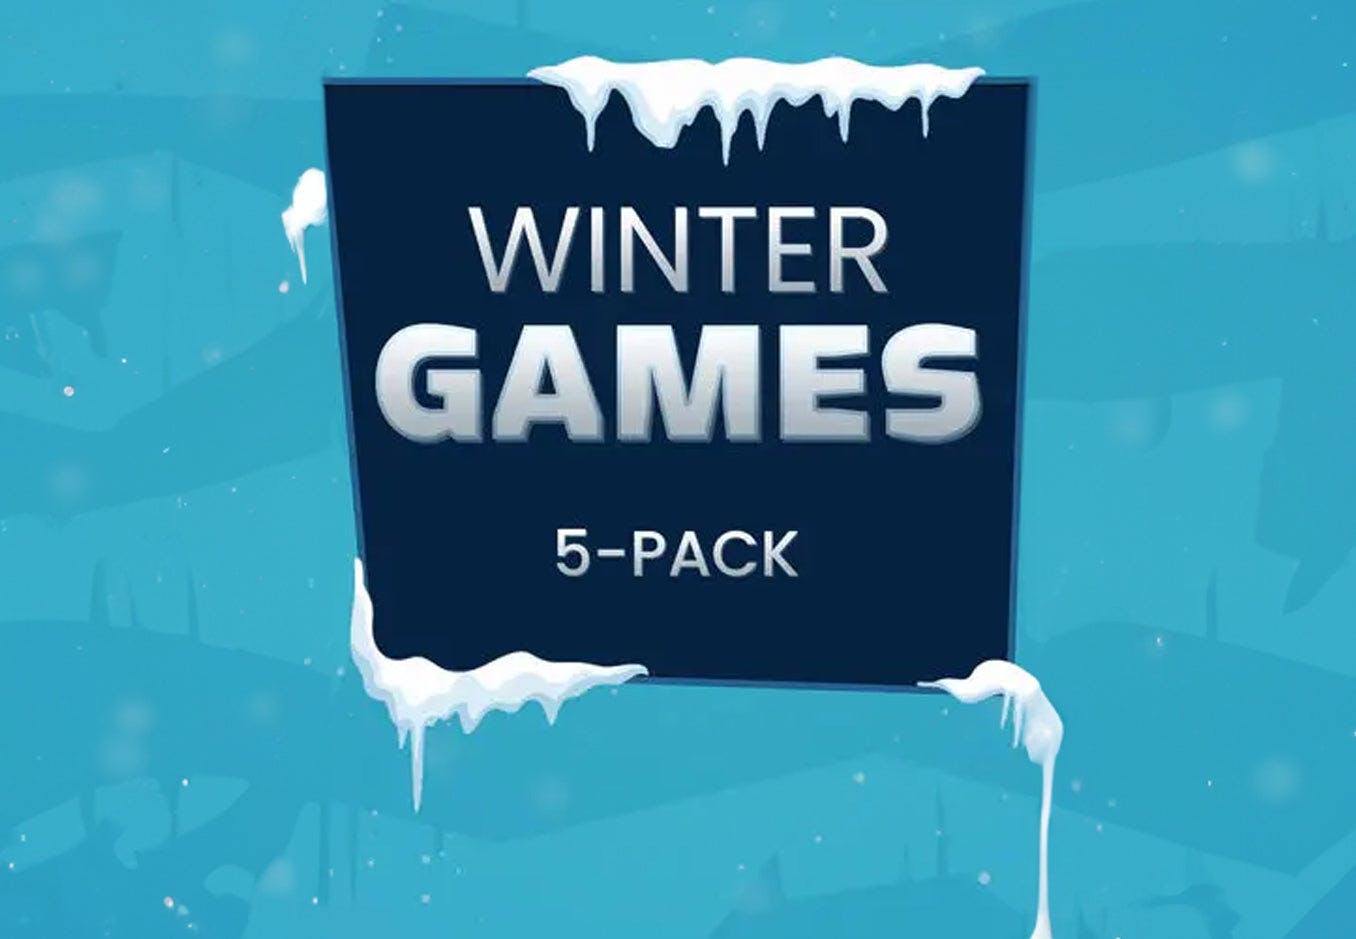 Winter Games 5-Pack